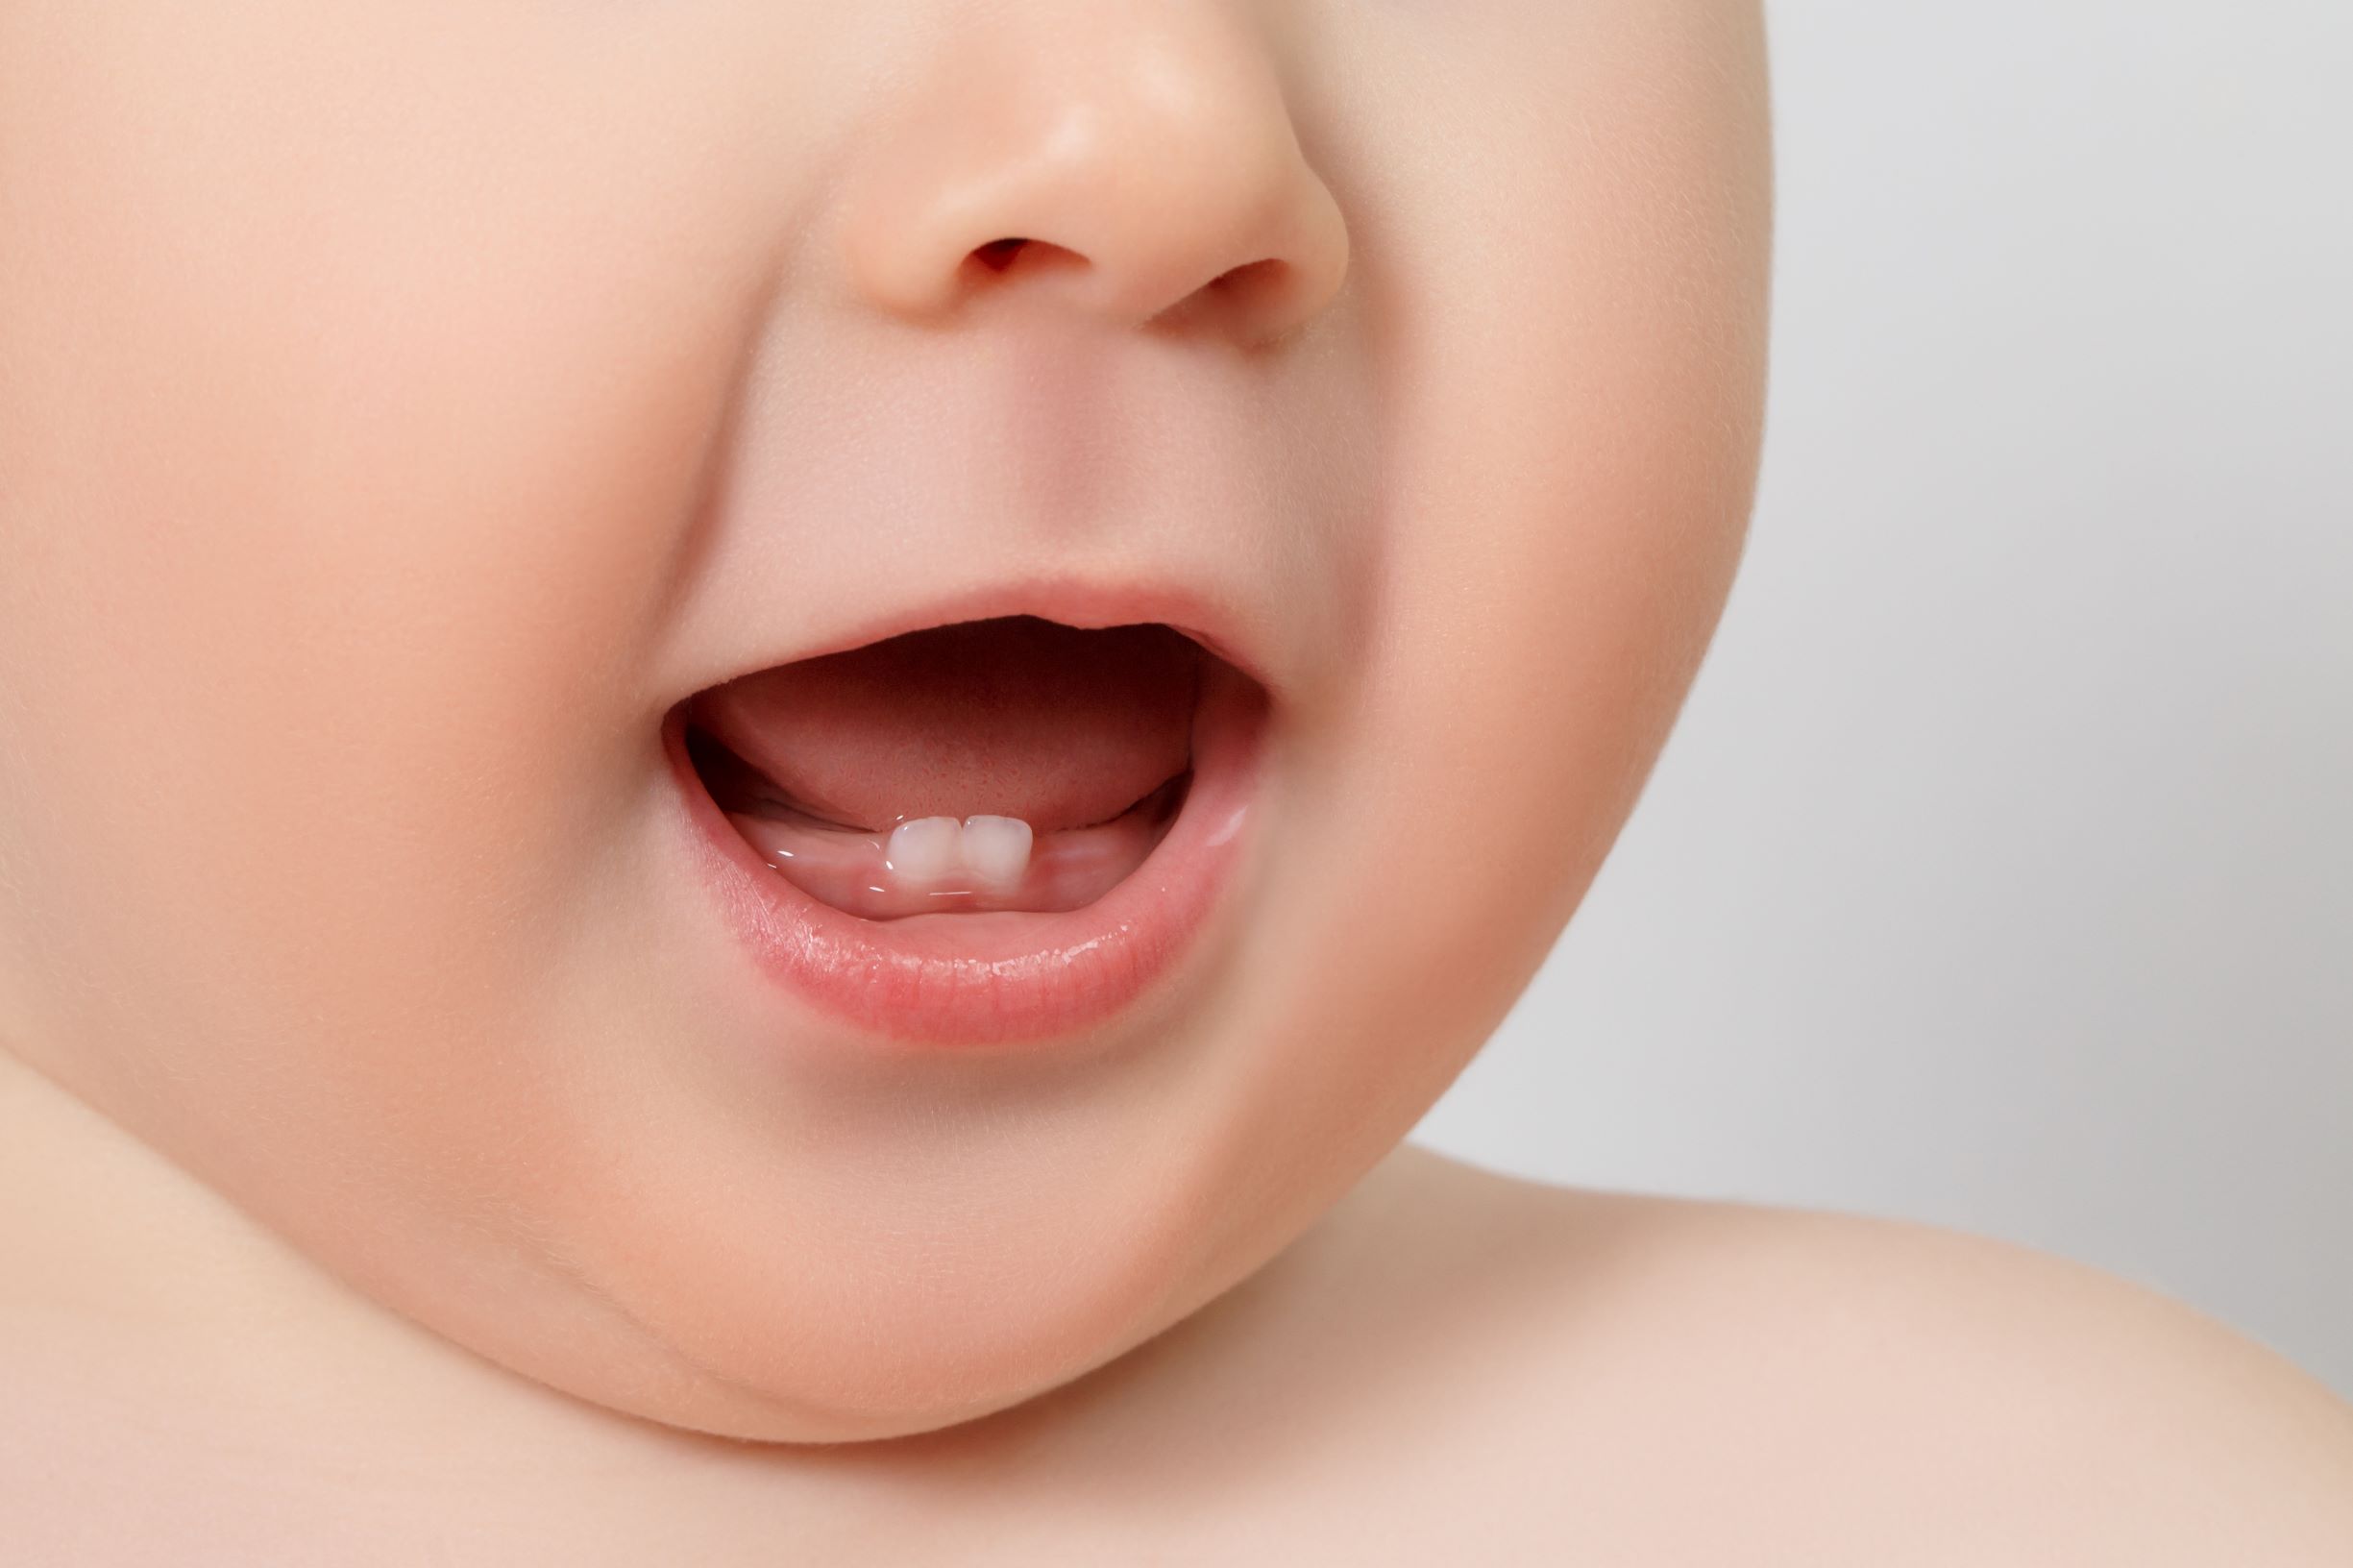 Baby teeth can be fascinating. The two middle teeth on the bottom jaw tend to poke through first, as shown in this picture of a smiling baby.